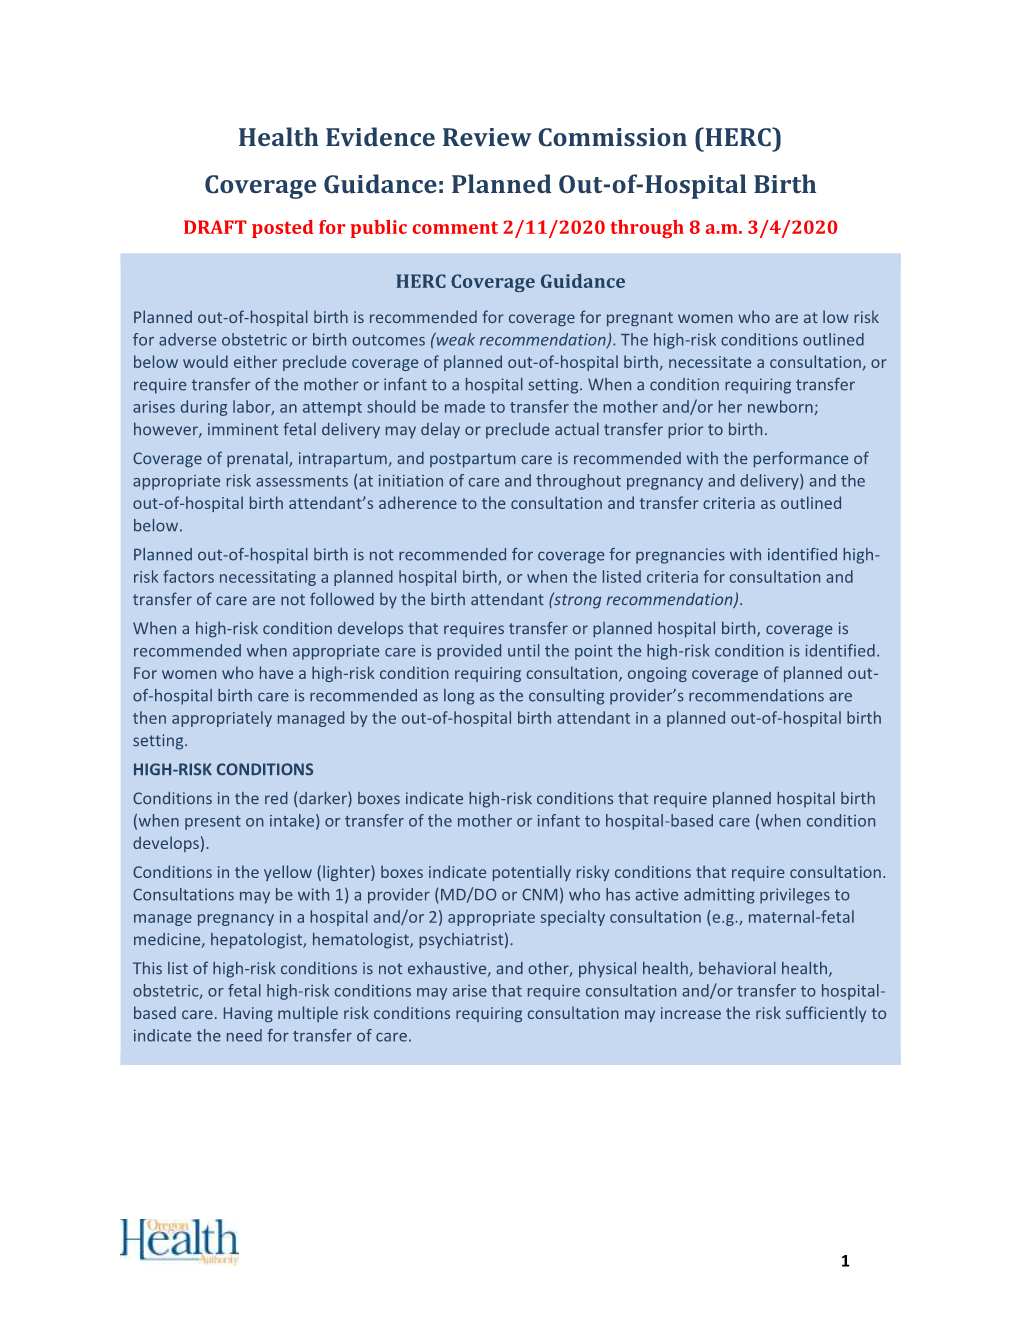 HERC) Coverage Guidance: Planned Out-Of-Hospital Birth DRAFT Posted for Public Comment 2/11/2020 Through 8 A.M